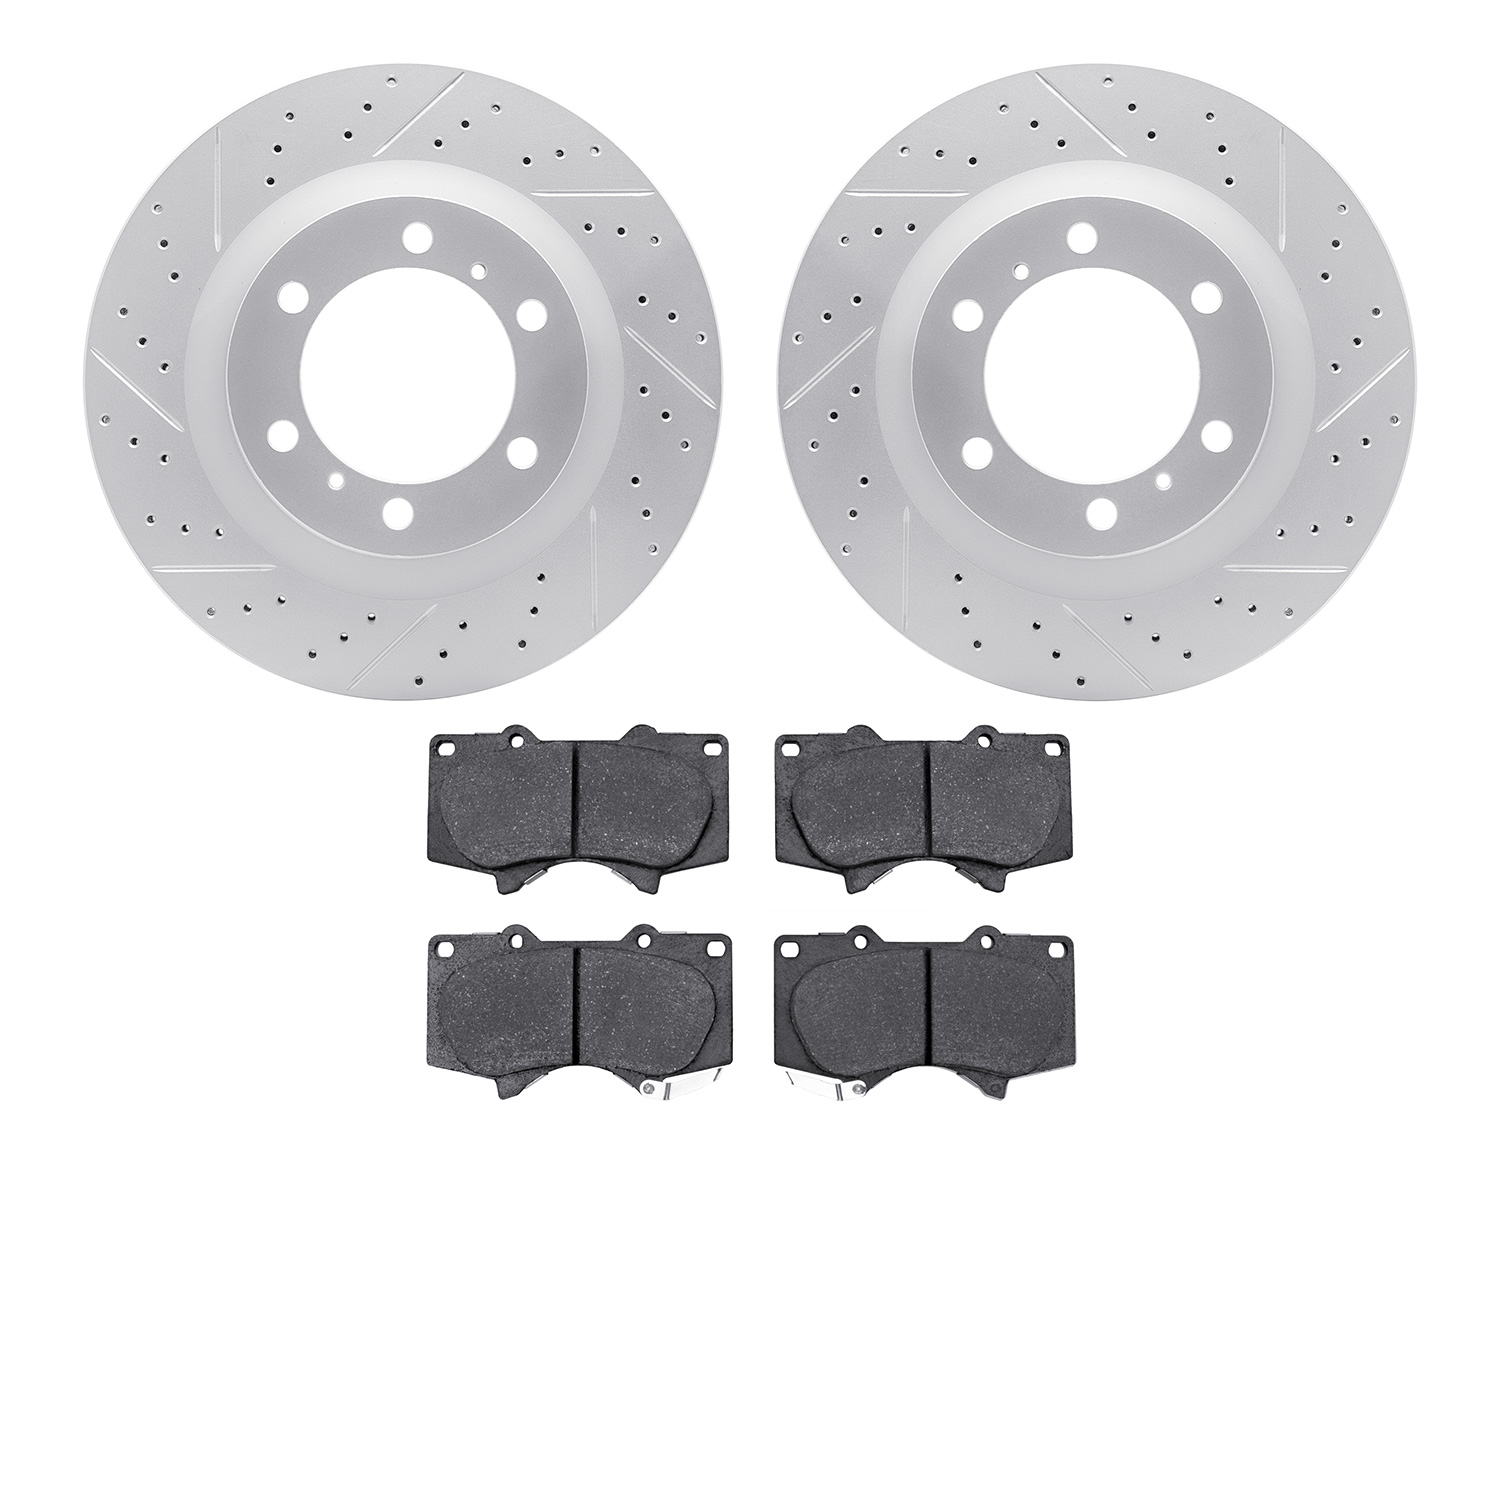 2502-76148 Geoperformance Drilled/Slotted Rotors w/5000 Advanced Brake Pads Kit, Fits Select Lexus/Toyota/Scion, Position: Front